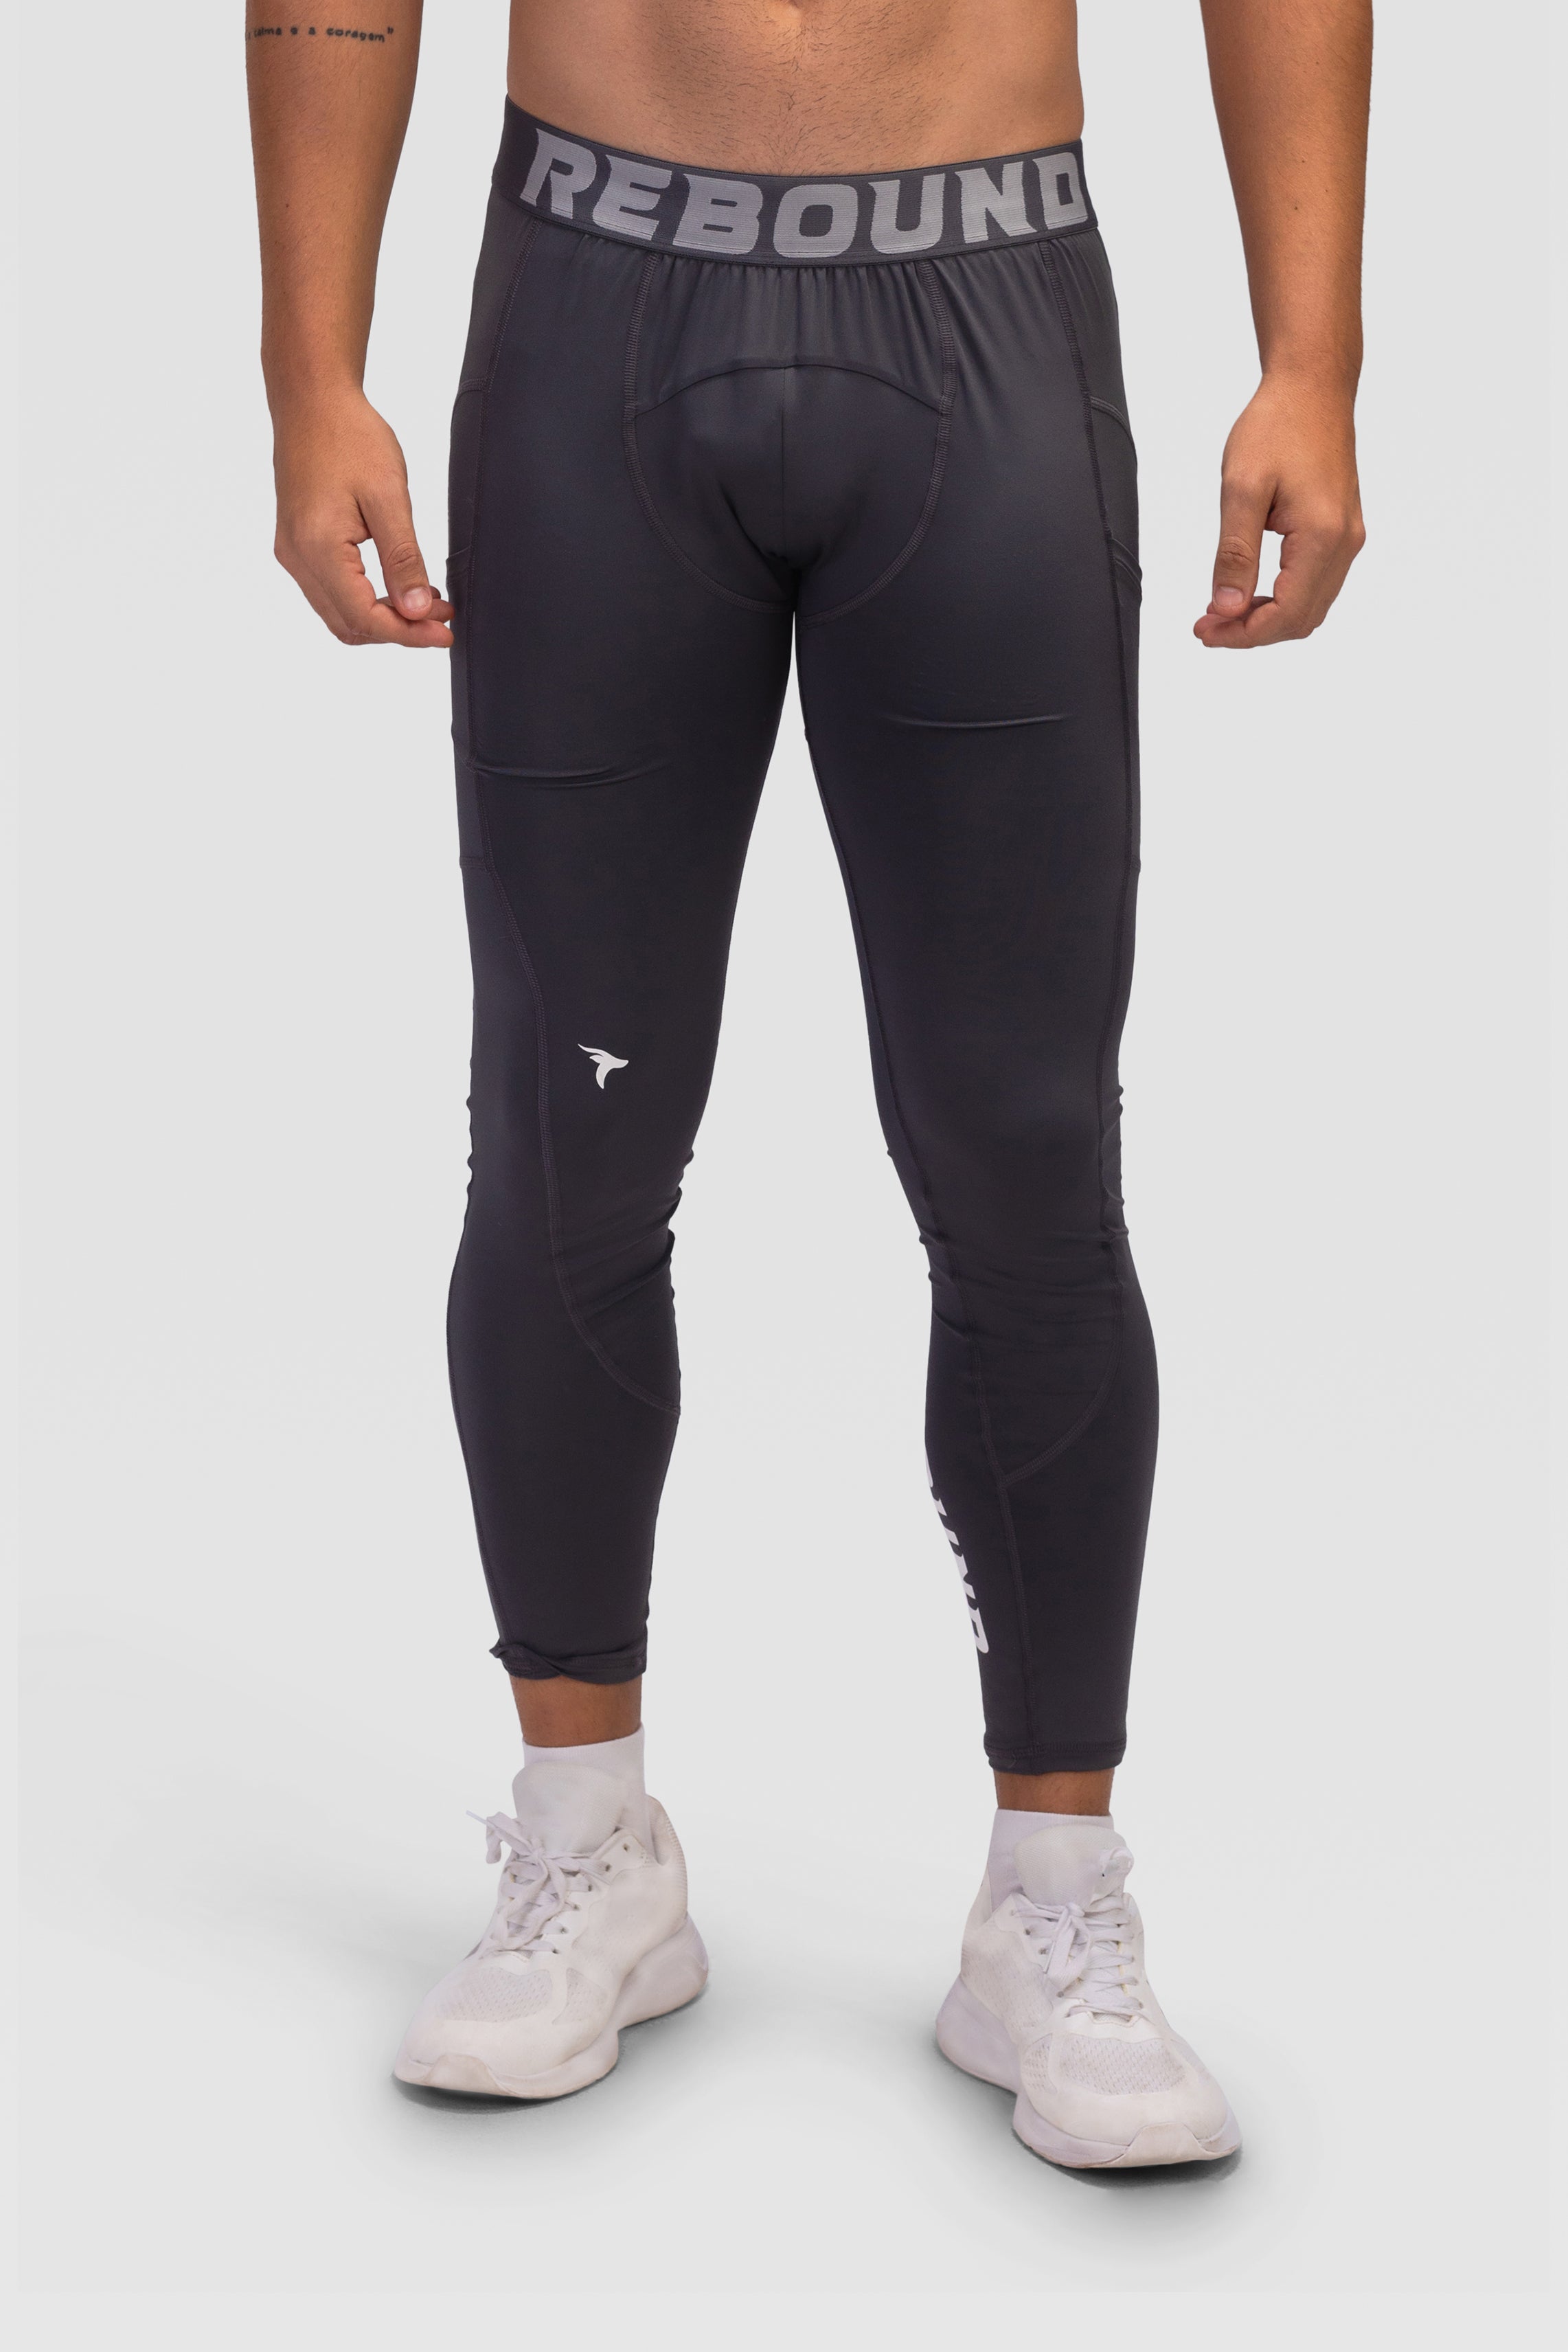 Mens Full Length Tights Reconnect - Space Gray